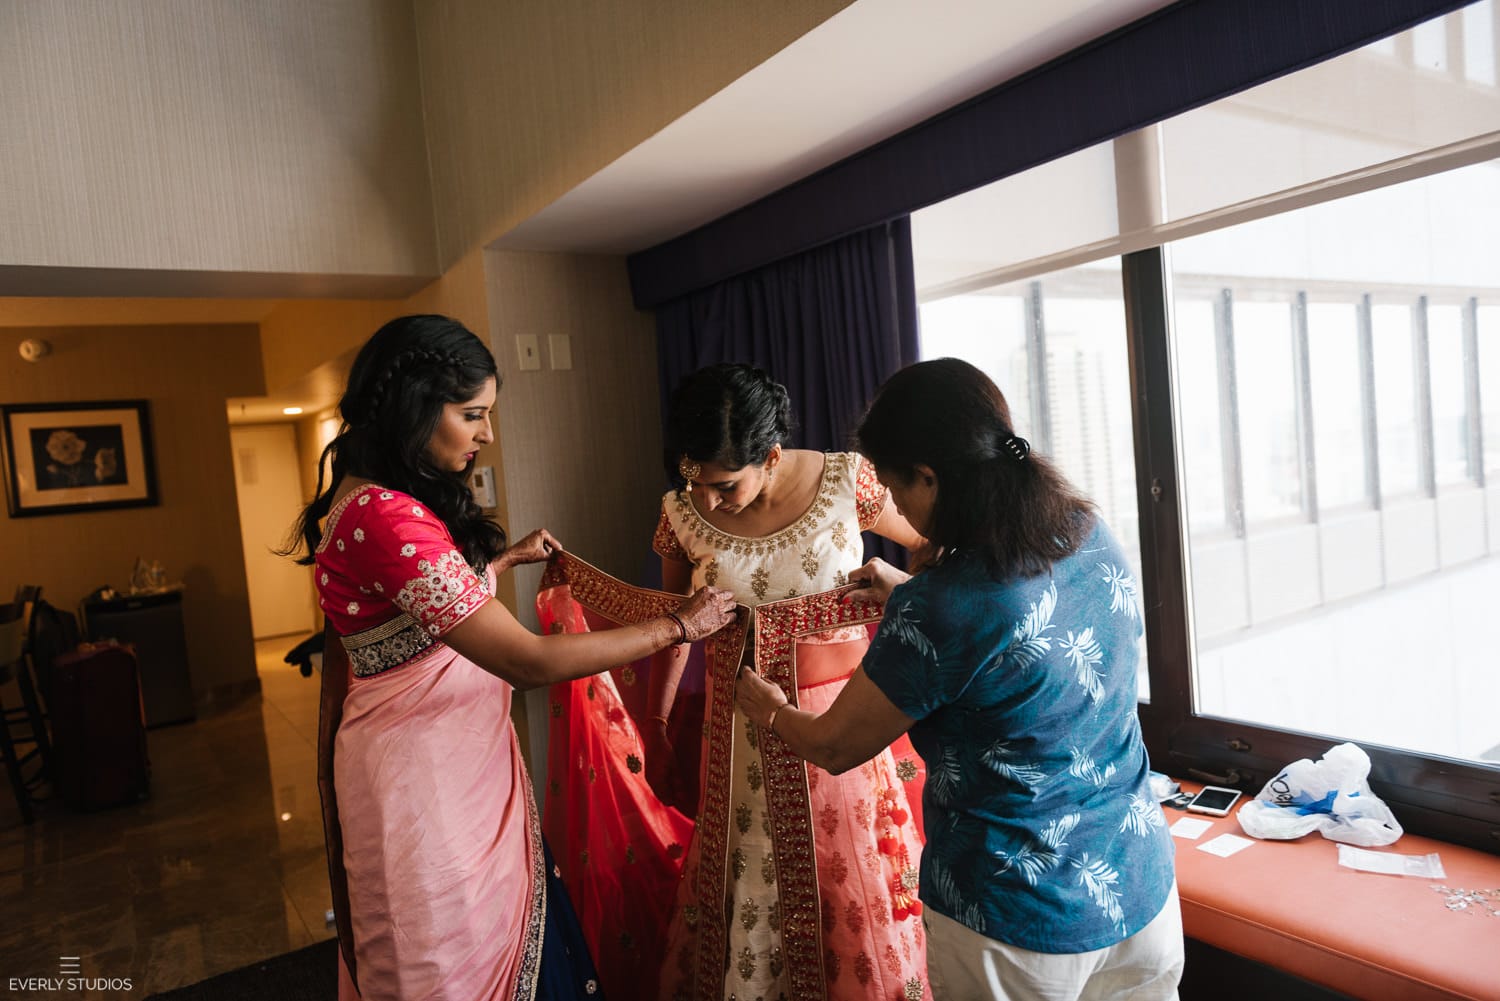 Wolf Point Ballroom wedding in Chicago. Photography by Indian wedding photographer NYC Everly Studios, www.everlystudios.com